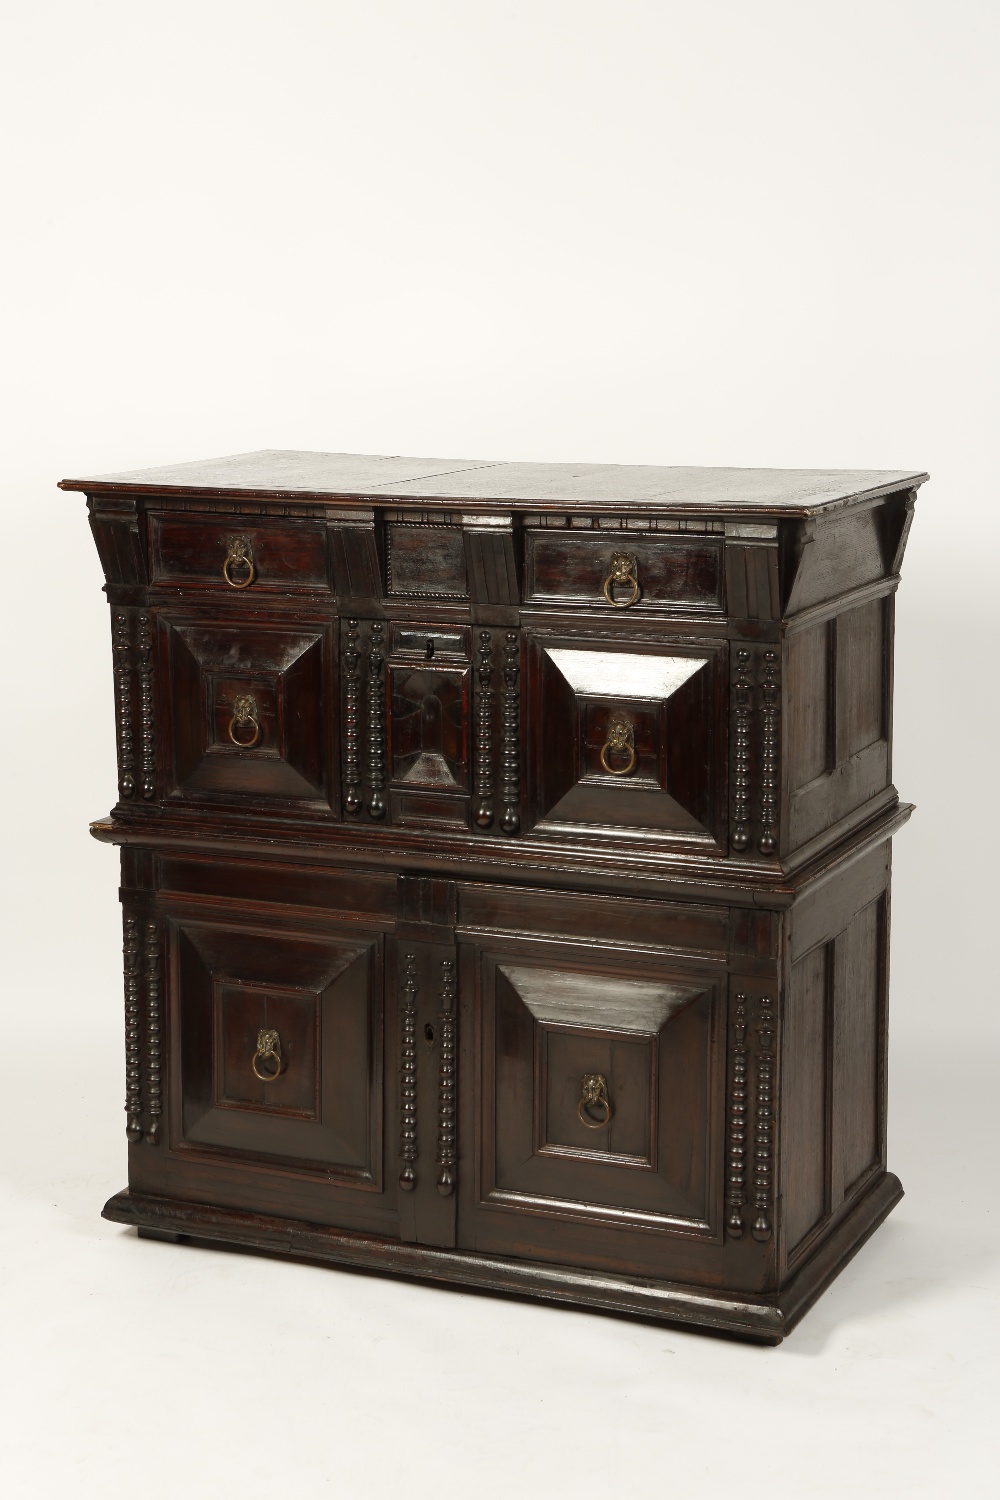 A LATE 17TH CENTURY OAK AND WALNUT ENCLOSED CHEST, the rectangular top above a long frieze drawer